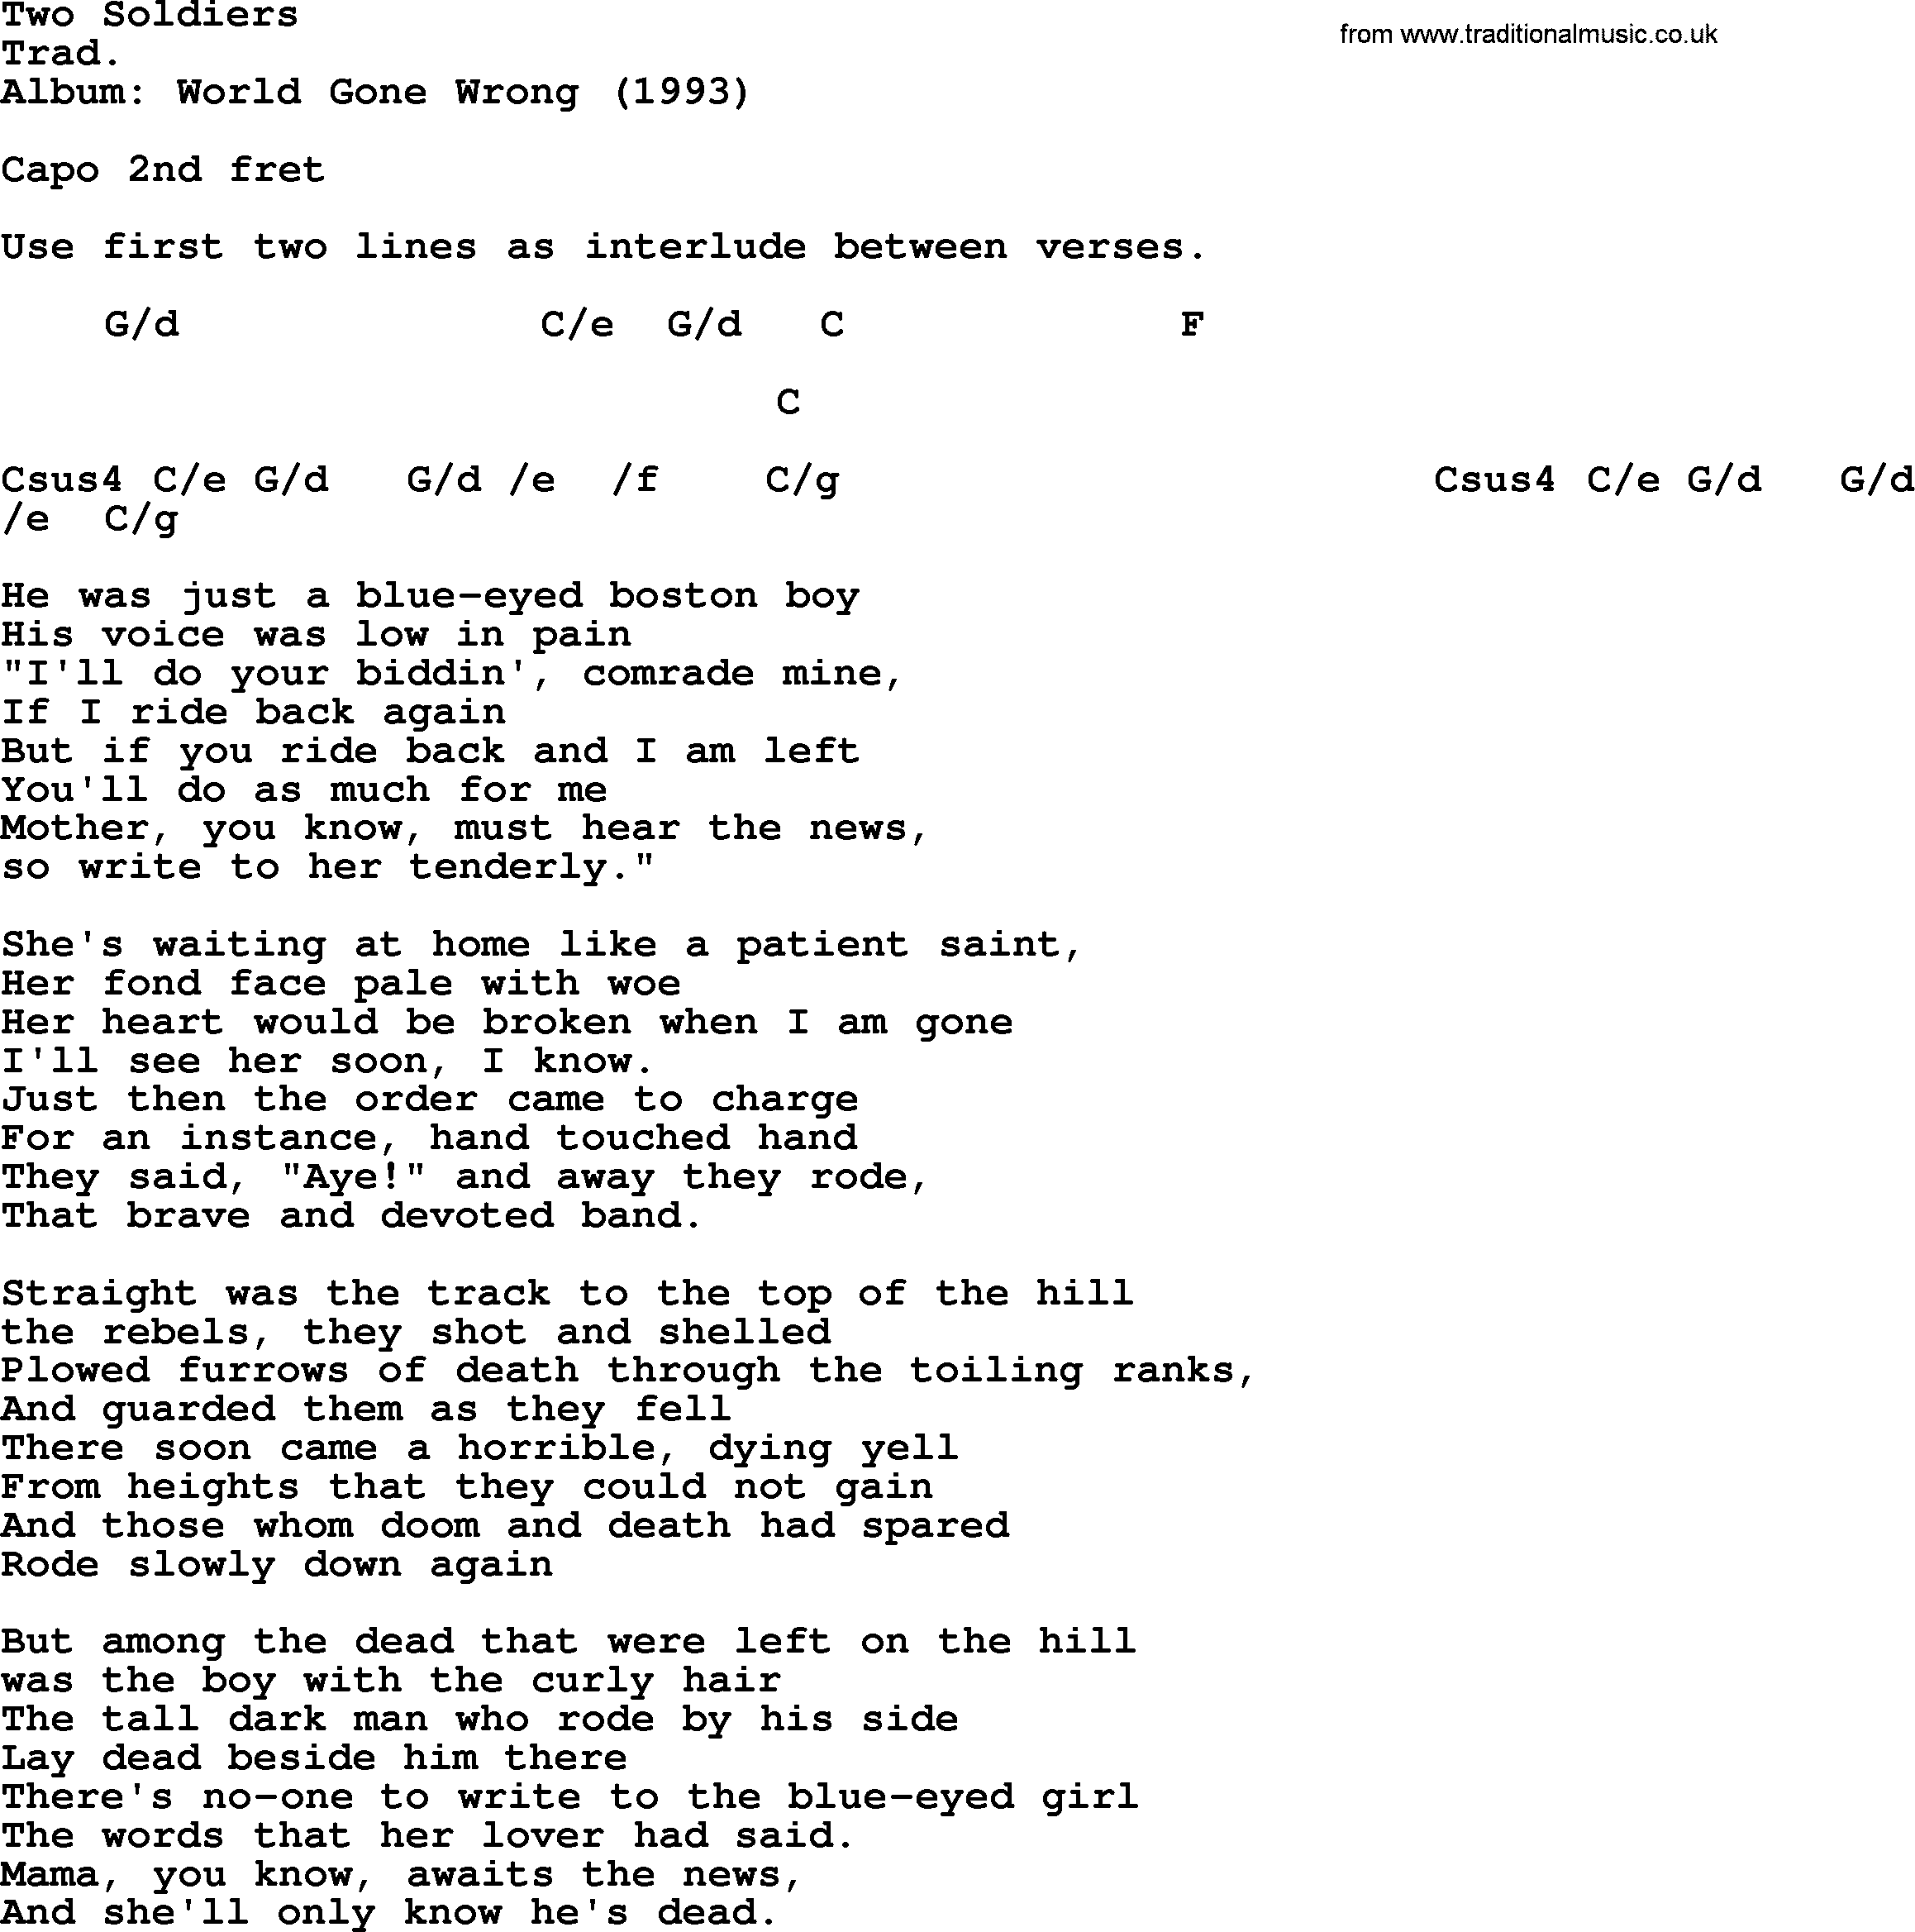 Bob Dylan song, lyrics with chords - Two Soldiers